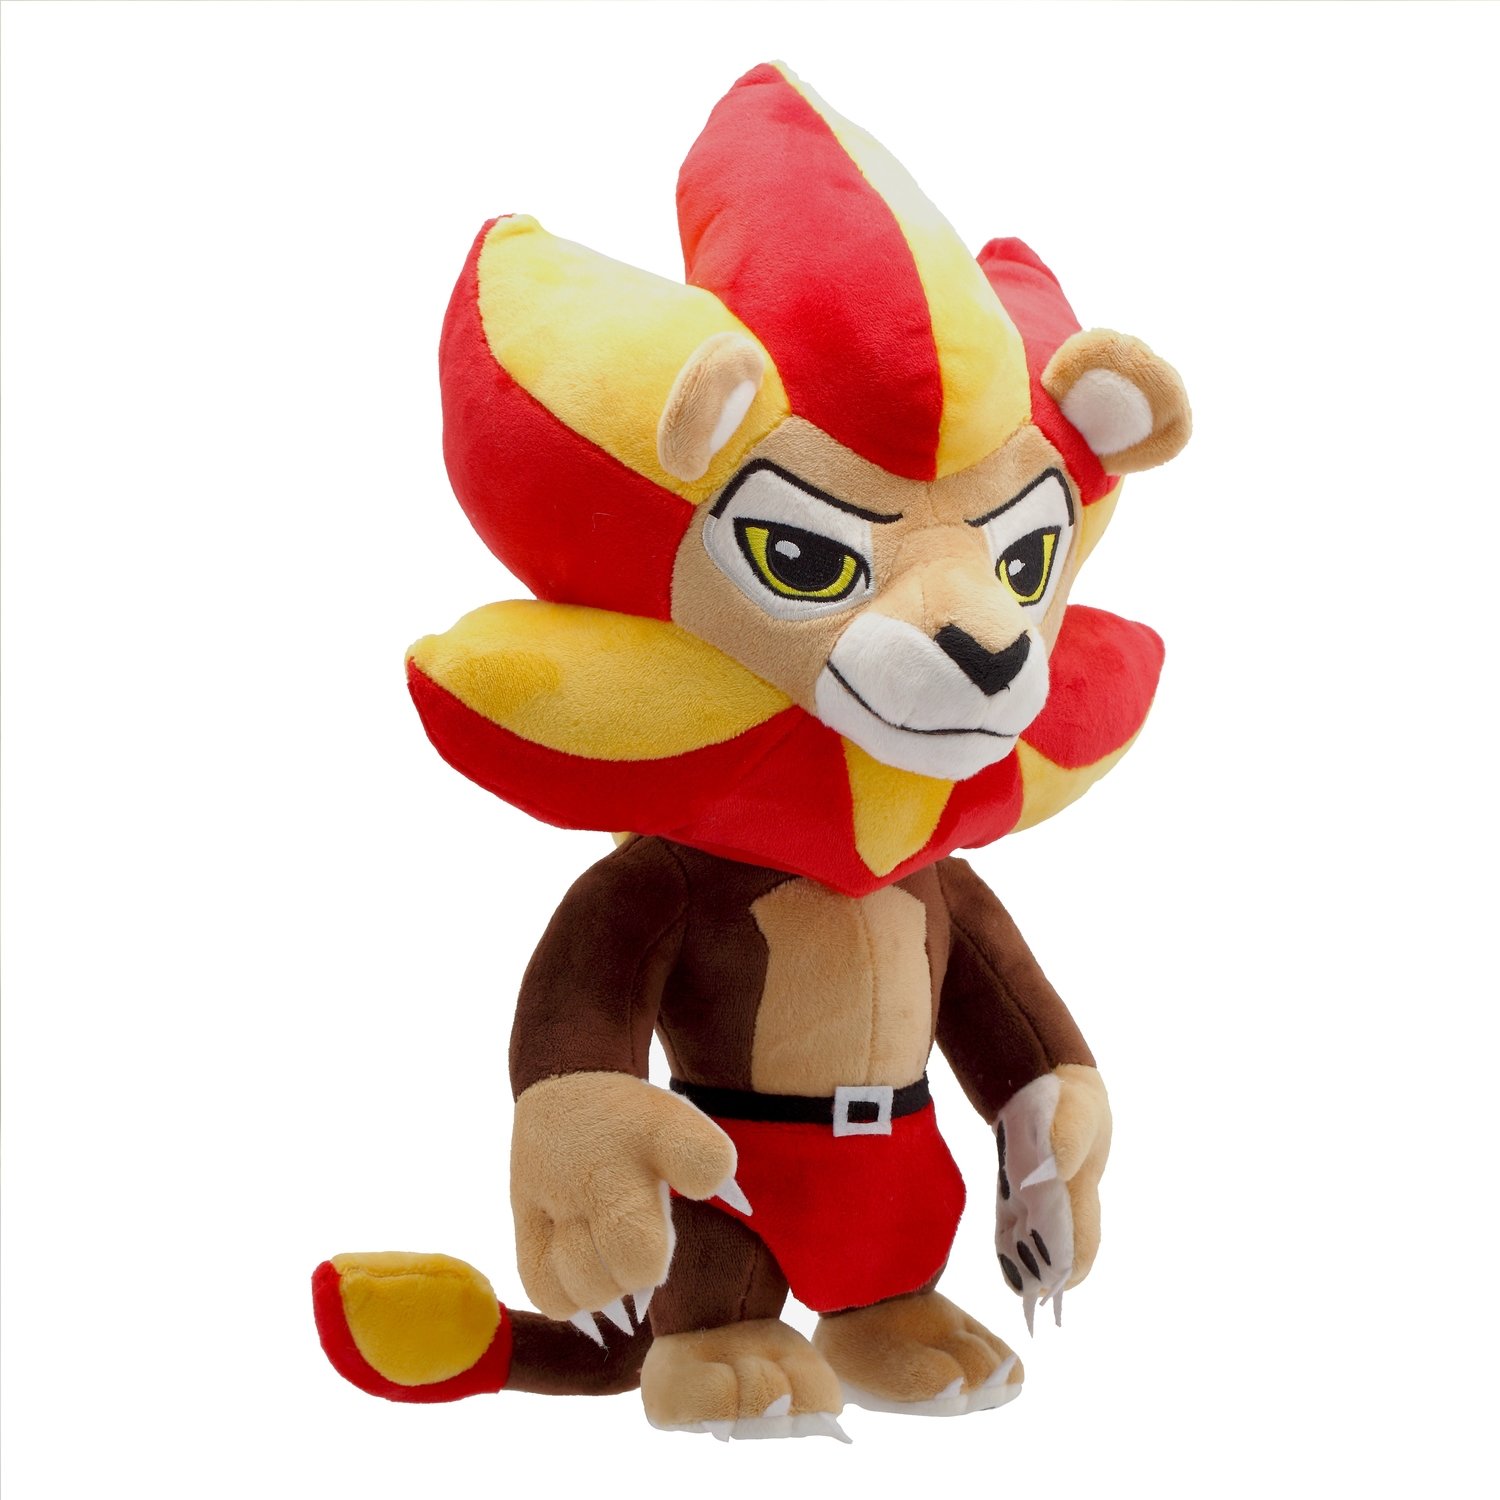 Rivals of Aether: Zetterburn Plush and DLC